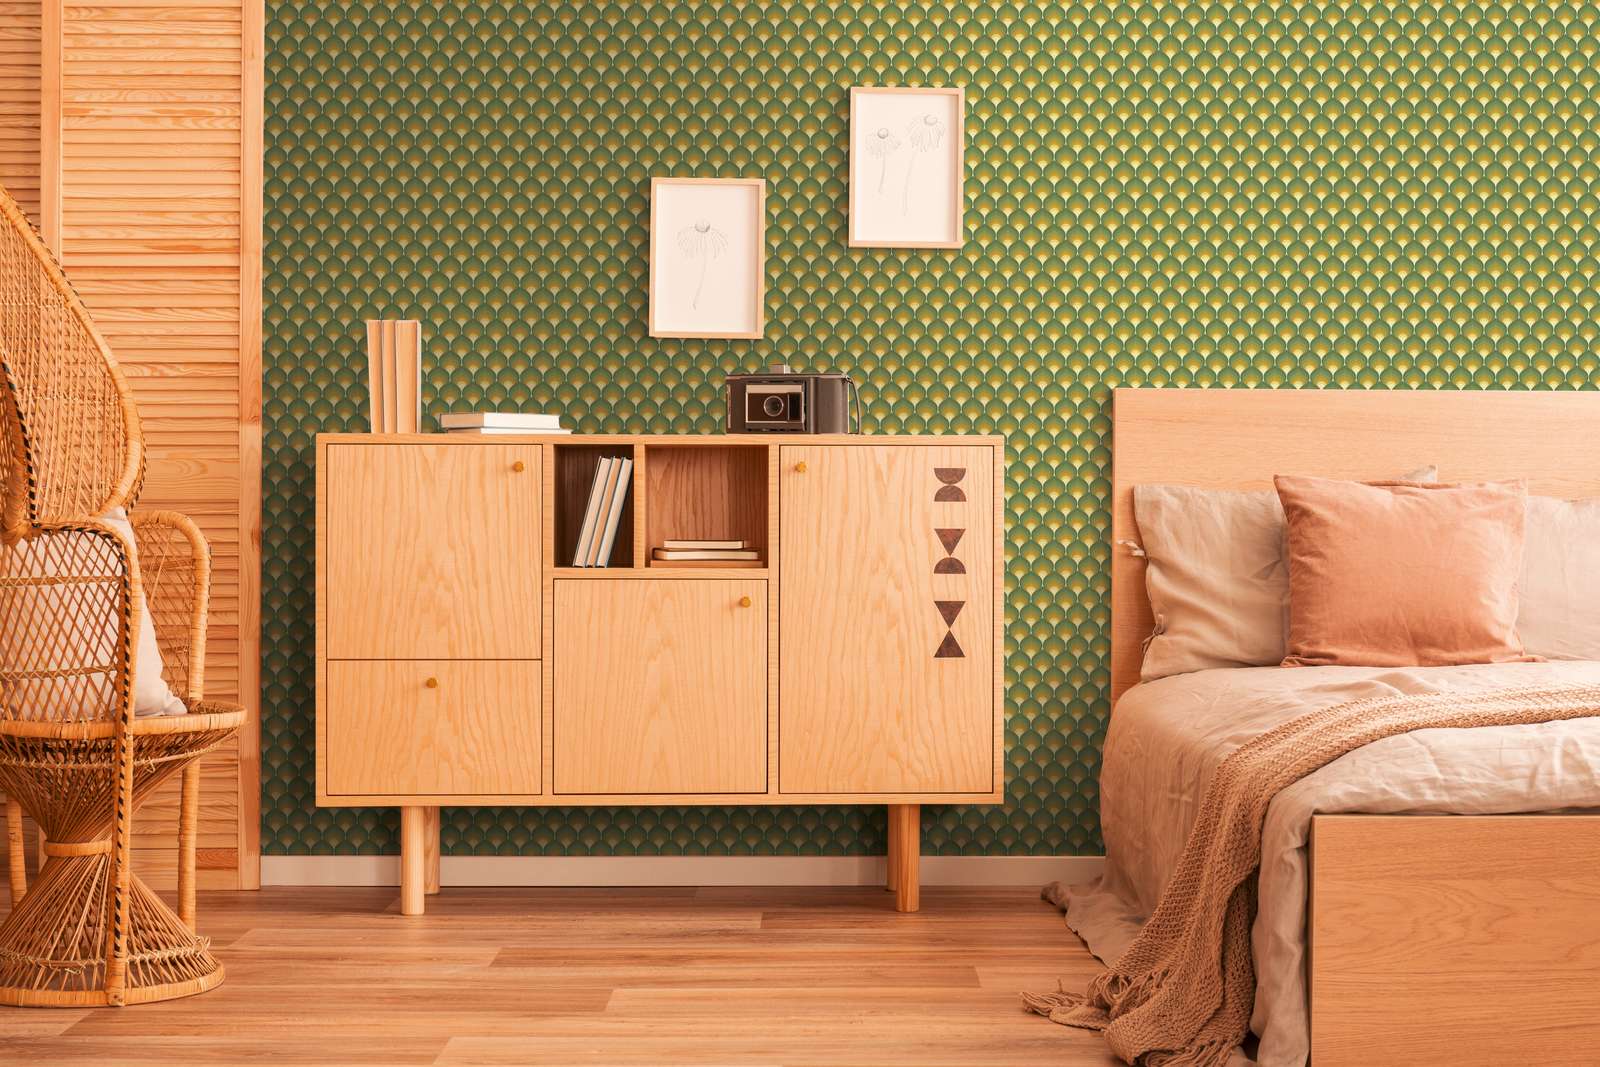             Retro style scaly pattern wallpaper - green, yellow, brown
        